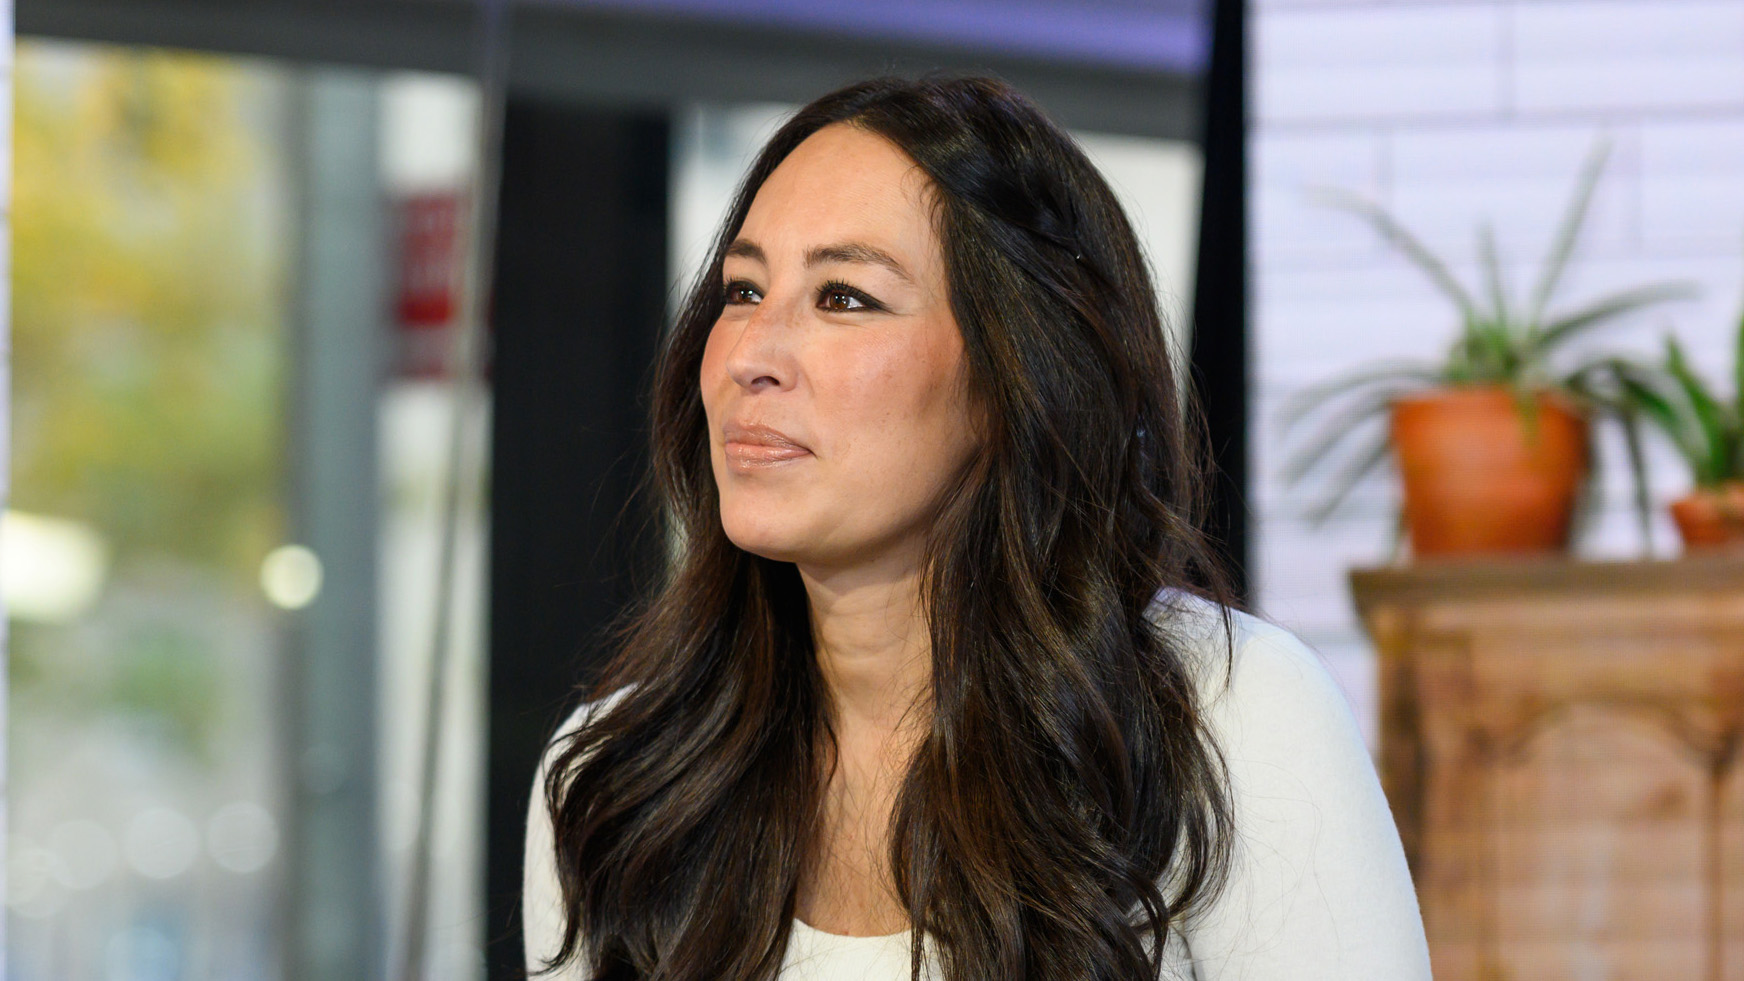 Joanna Gaines Was 'Shy' and 'Longed to Be Understood' in School